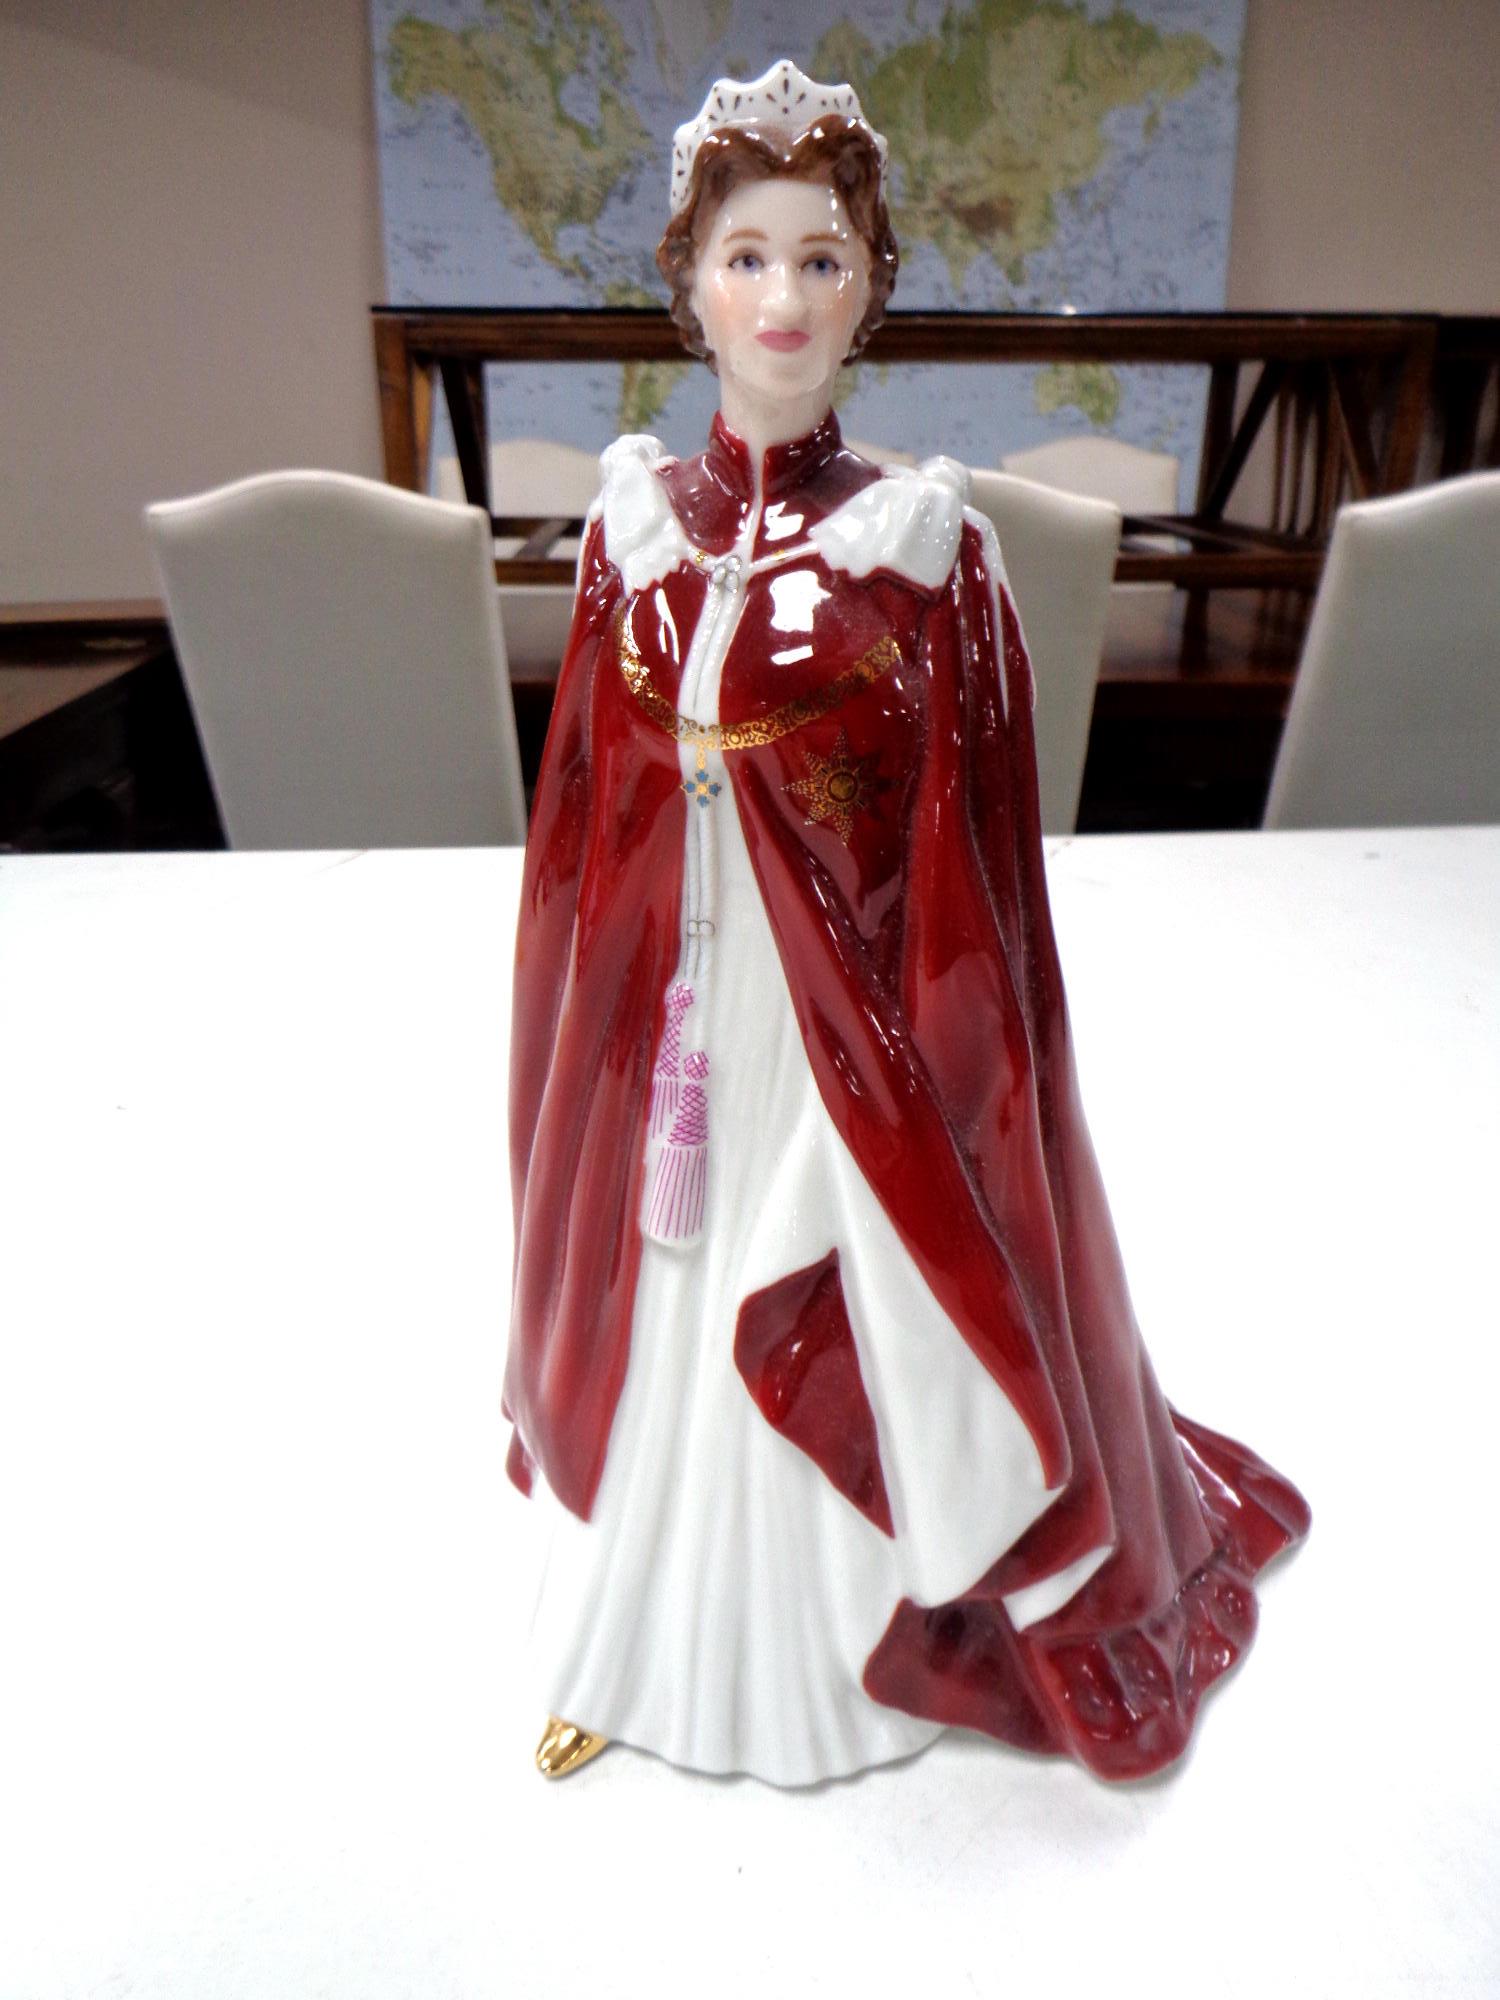 A Royal Worcester figure in celebration of the Queen's 80th birthday 2006.